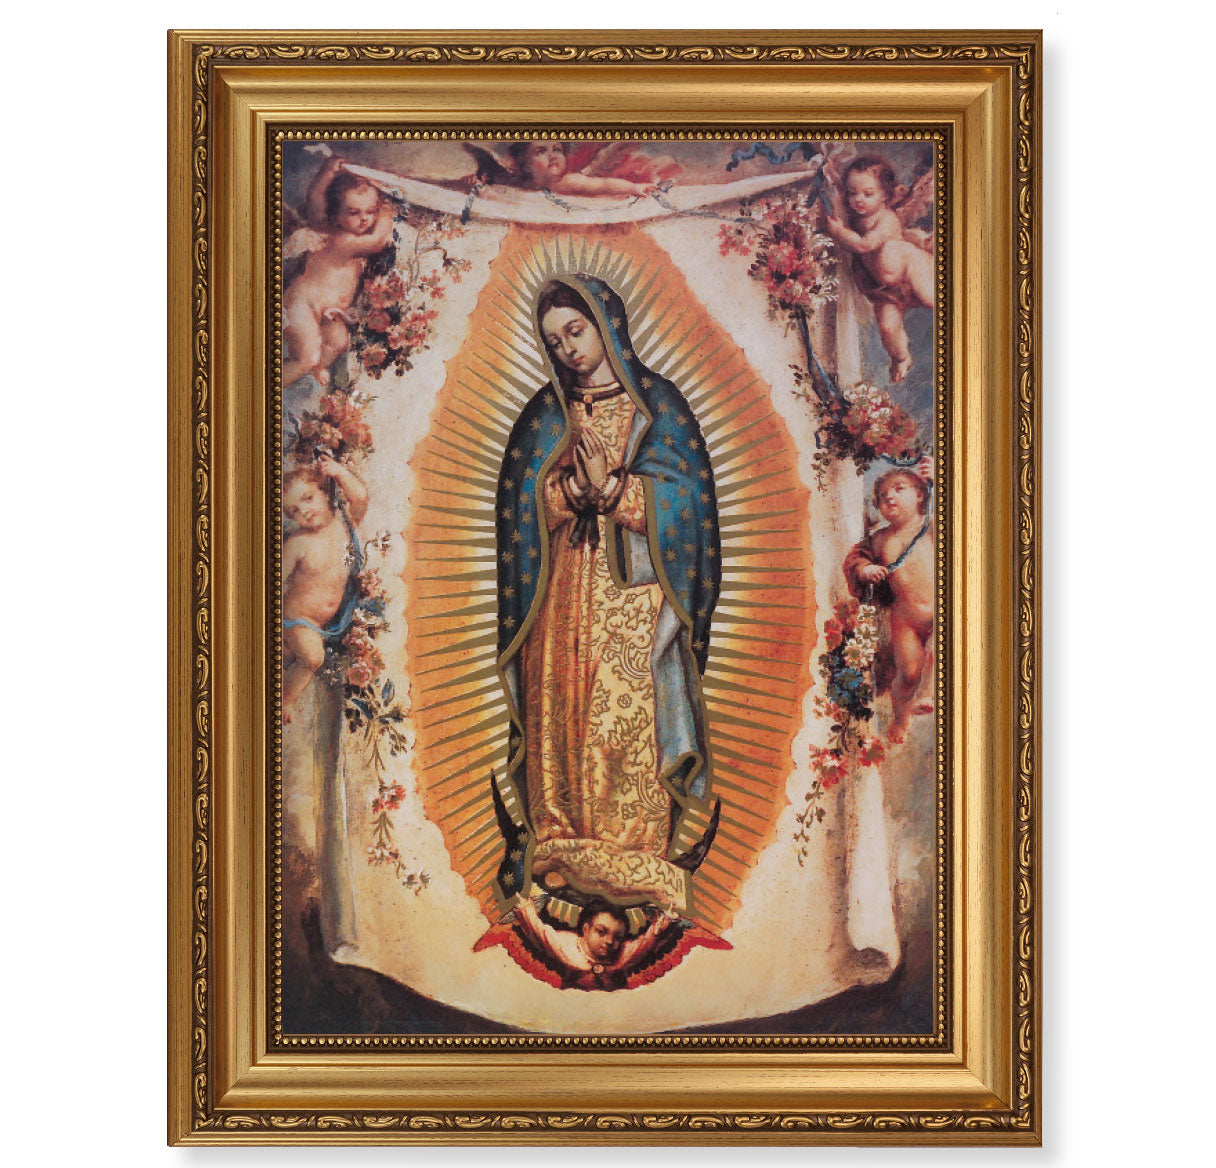 Our Lady of Guadalupe with Angels Antique Gold Framed Art